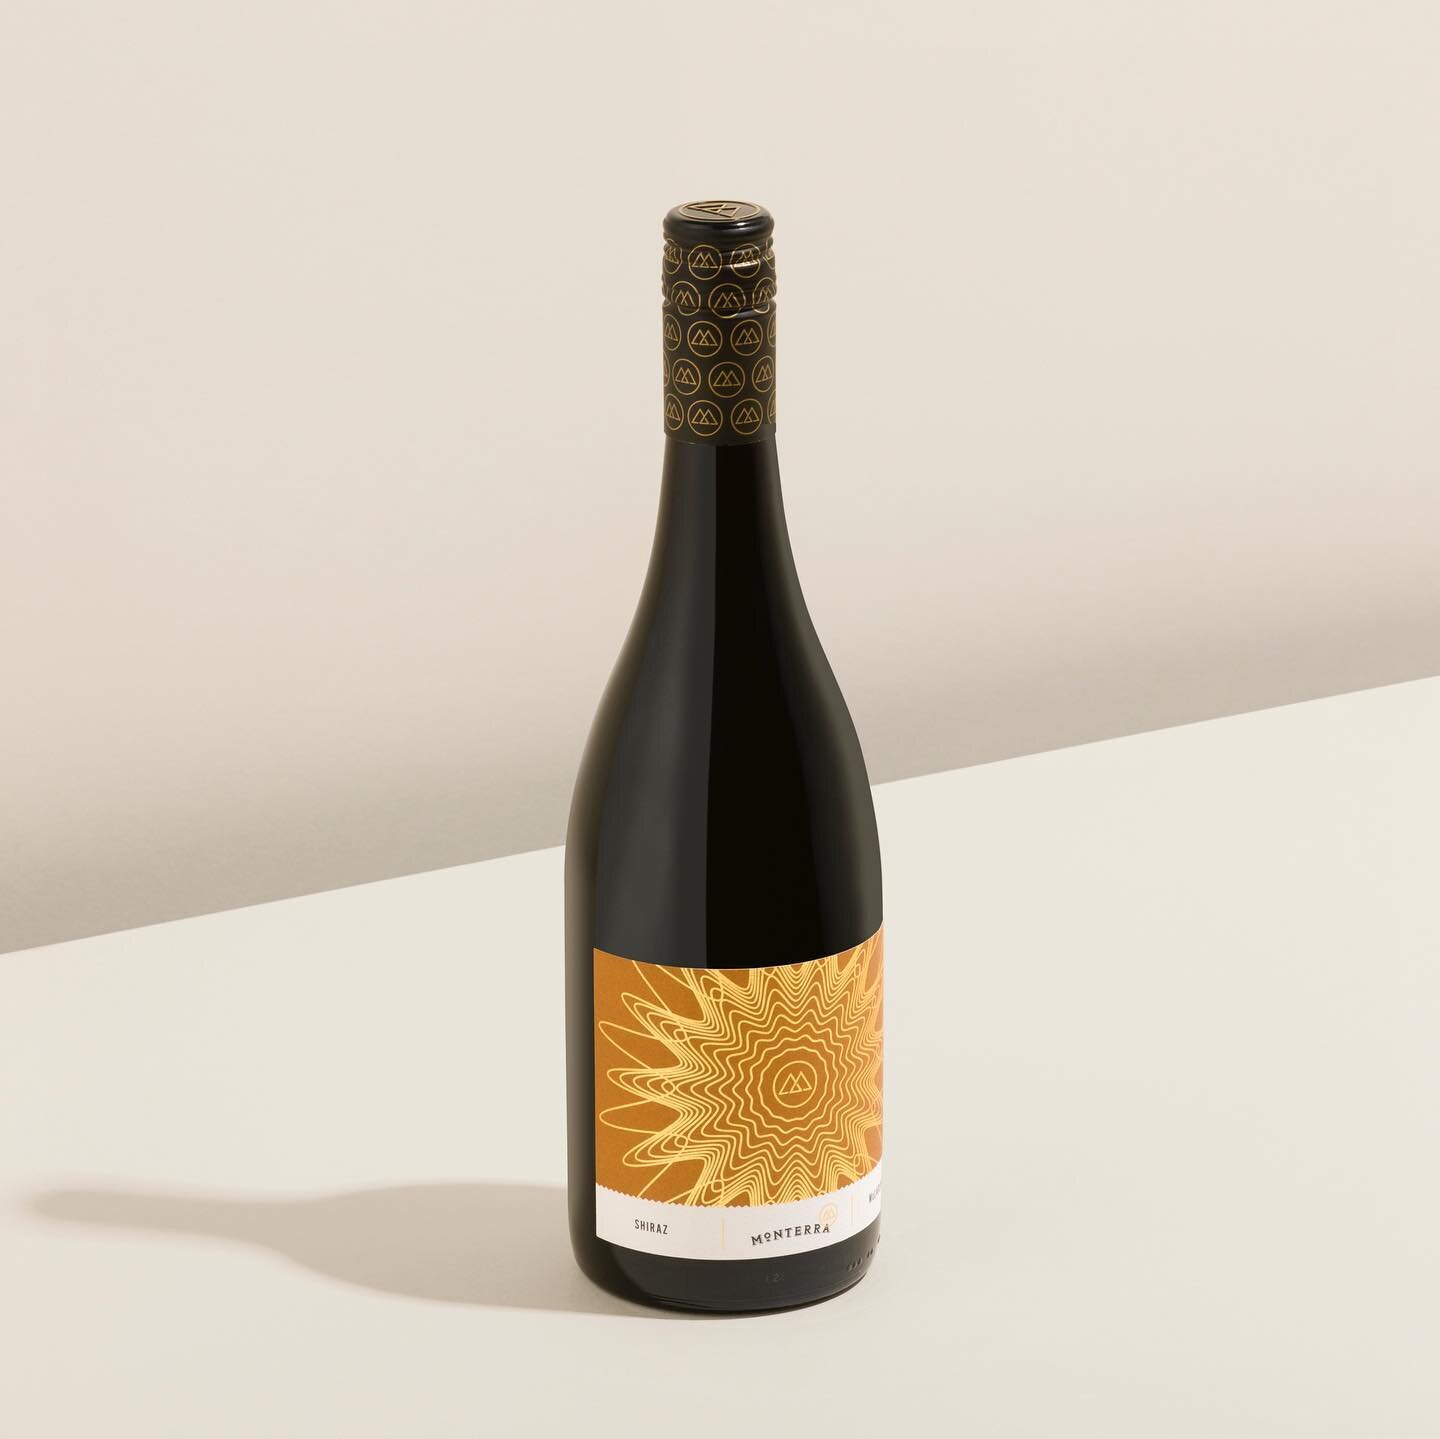 For the last decade, Monterra has created high-end wines born from idyllic vineyards in South Australia. In recent times, the brand has expanded their product offering and steered towards a more sustainable and vegan focus. A review of the core range